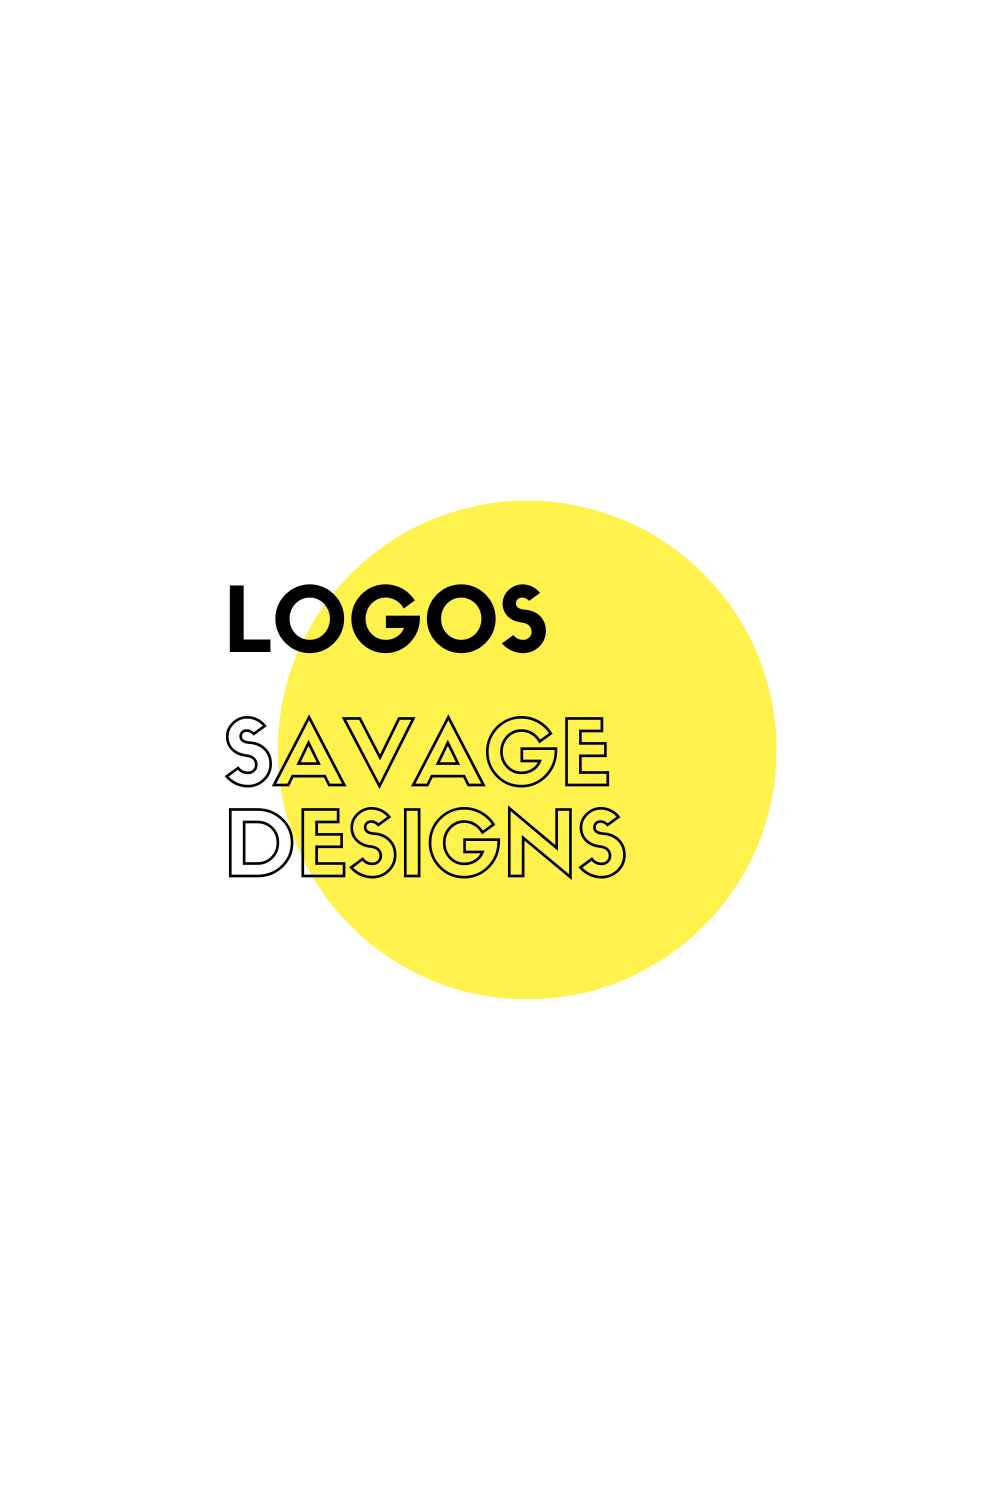 Creative logo with yellow round and modern font.